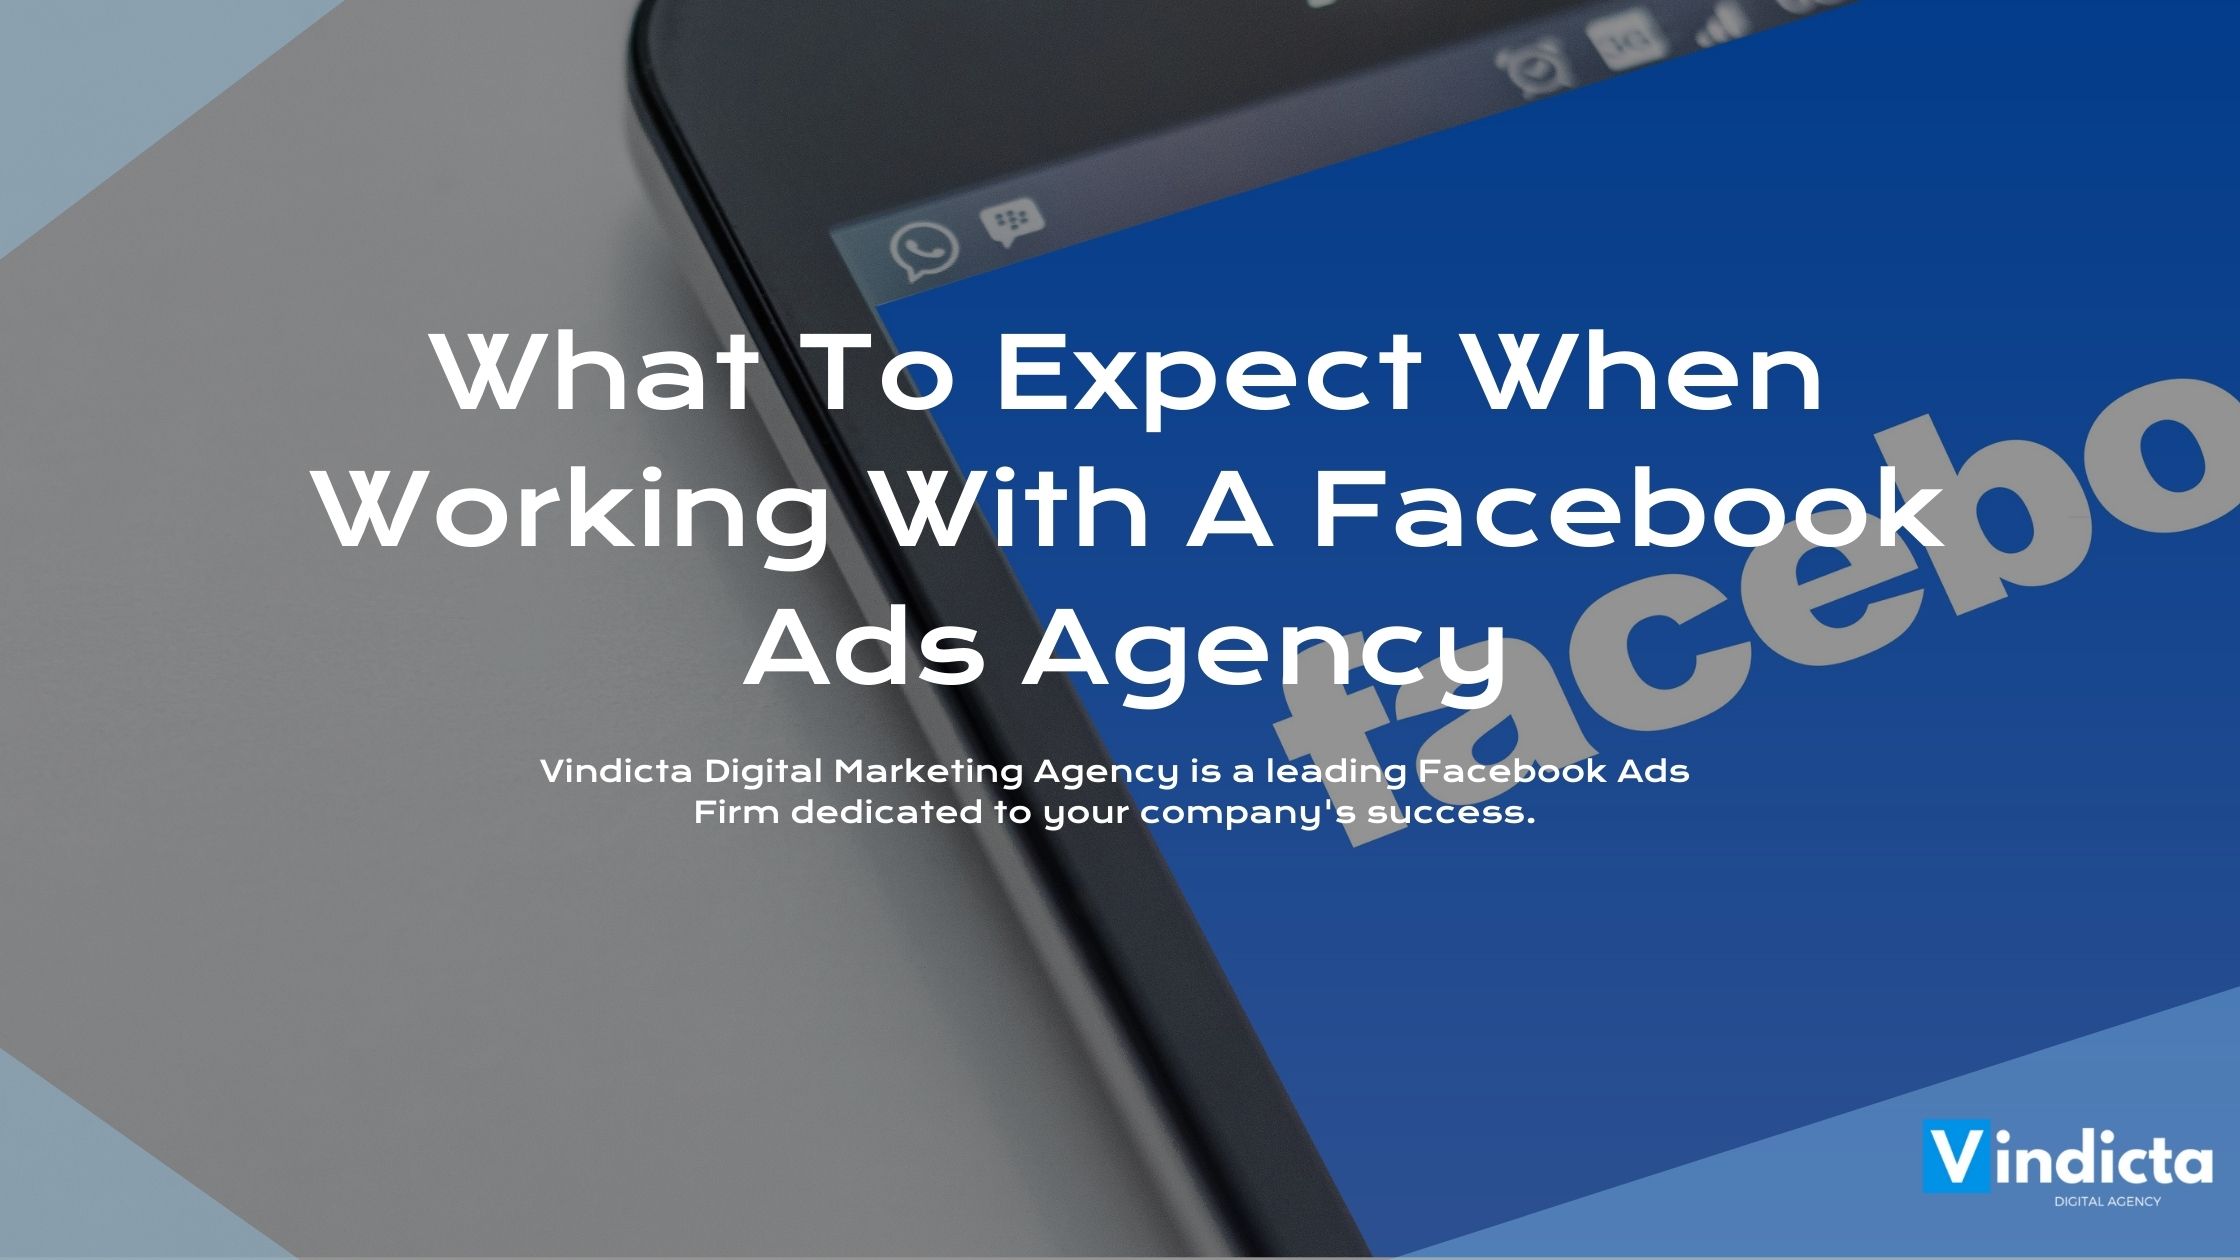 What To Expect When Working With A Facebook Ads Agency